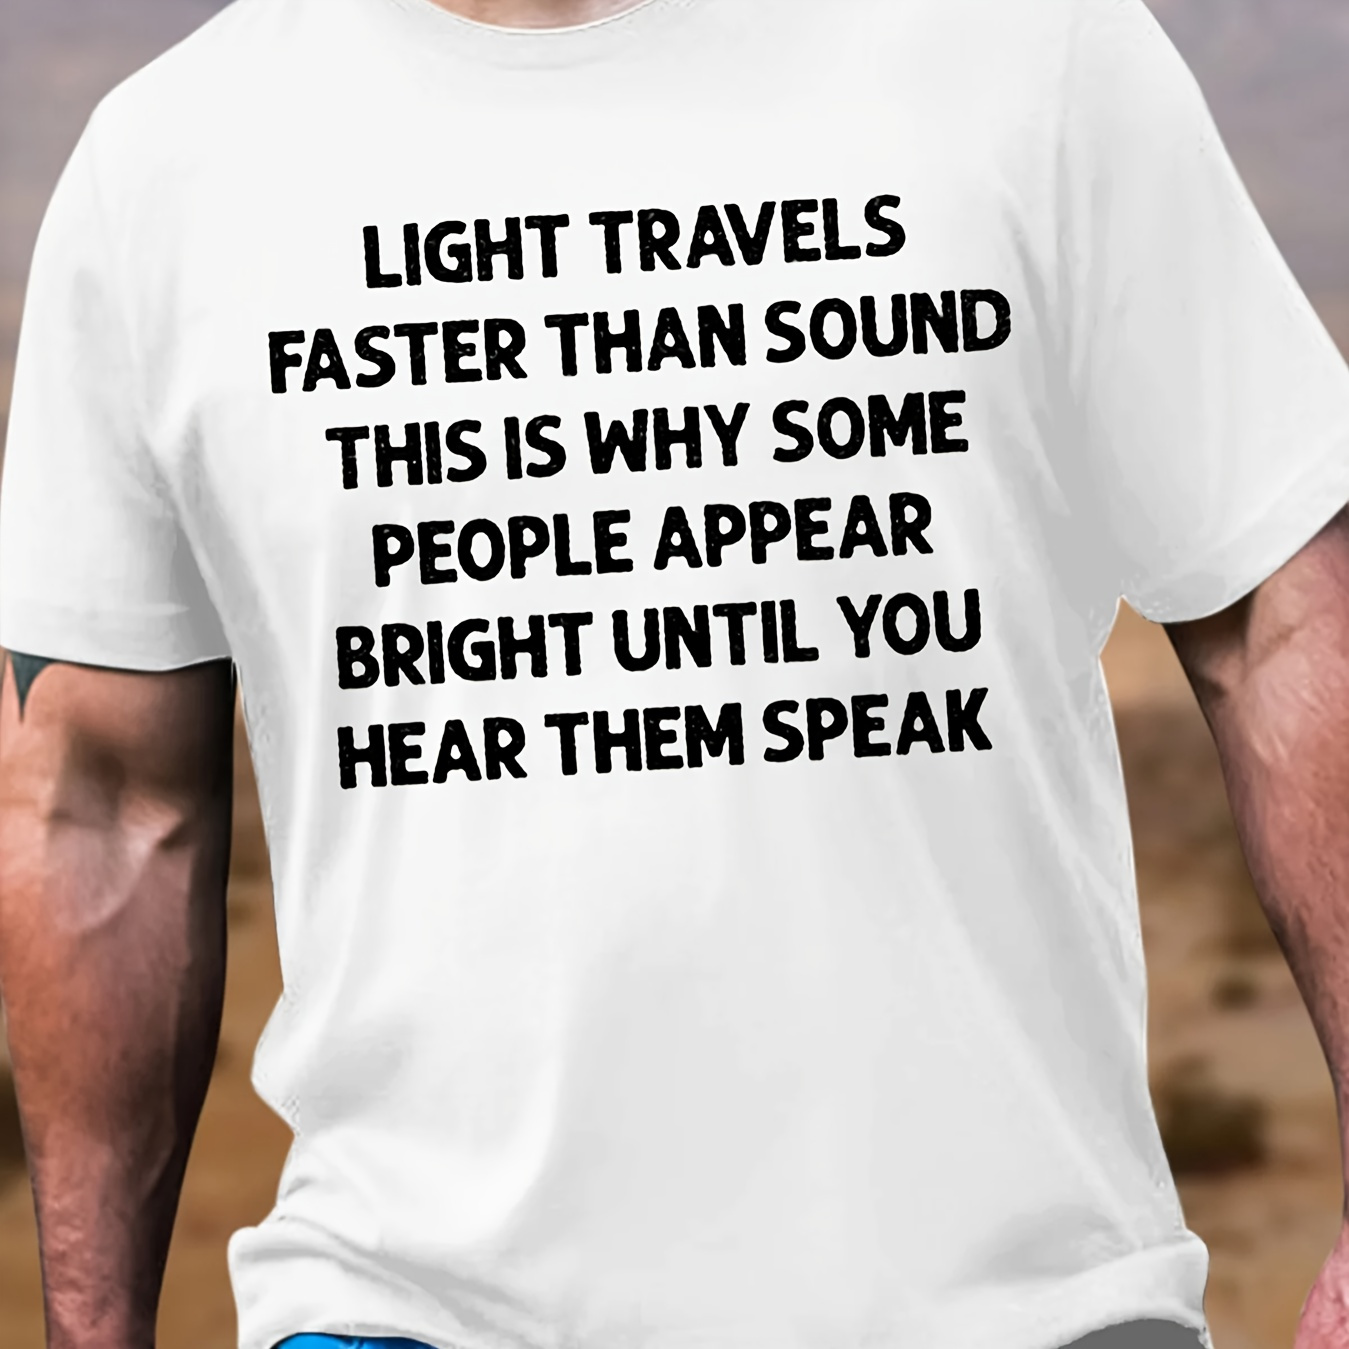 

Light Travels Faster Than Sound... Print Tees For Men, Casual Crew Neck Short Sleeve T-shirt, Comfortable Breathable T-shirt